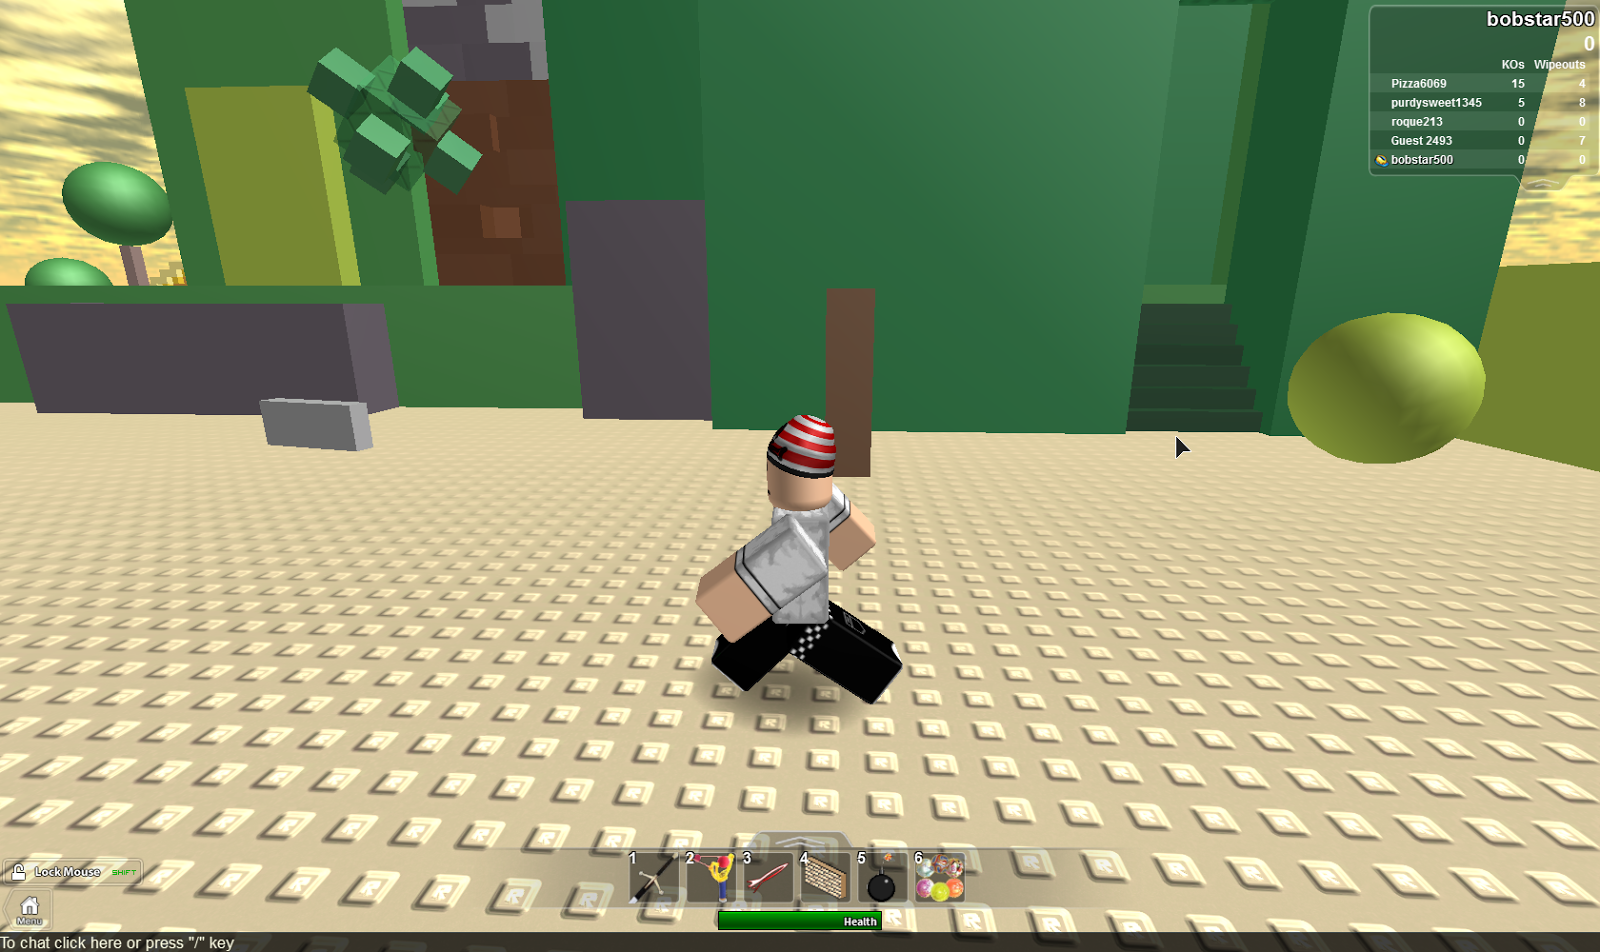 Unofficial Roblox New Roblox Character Animations A Bad Update - roblox obby roblox bad animation roblox animation roblox